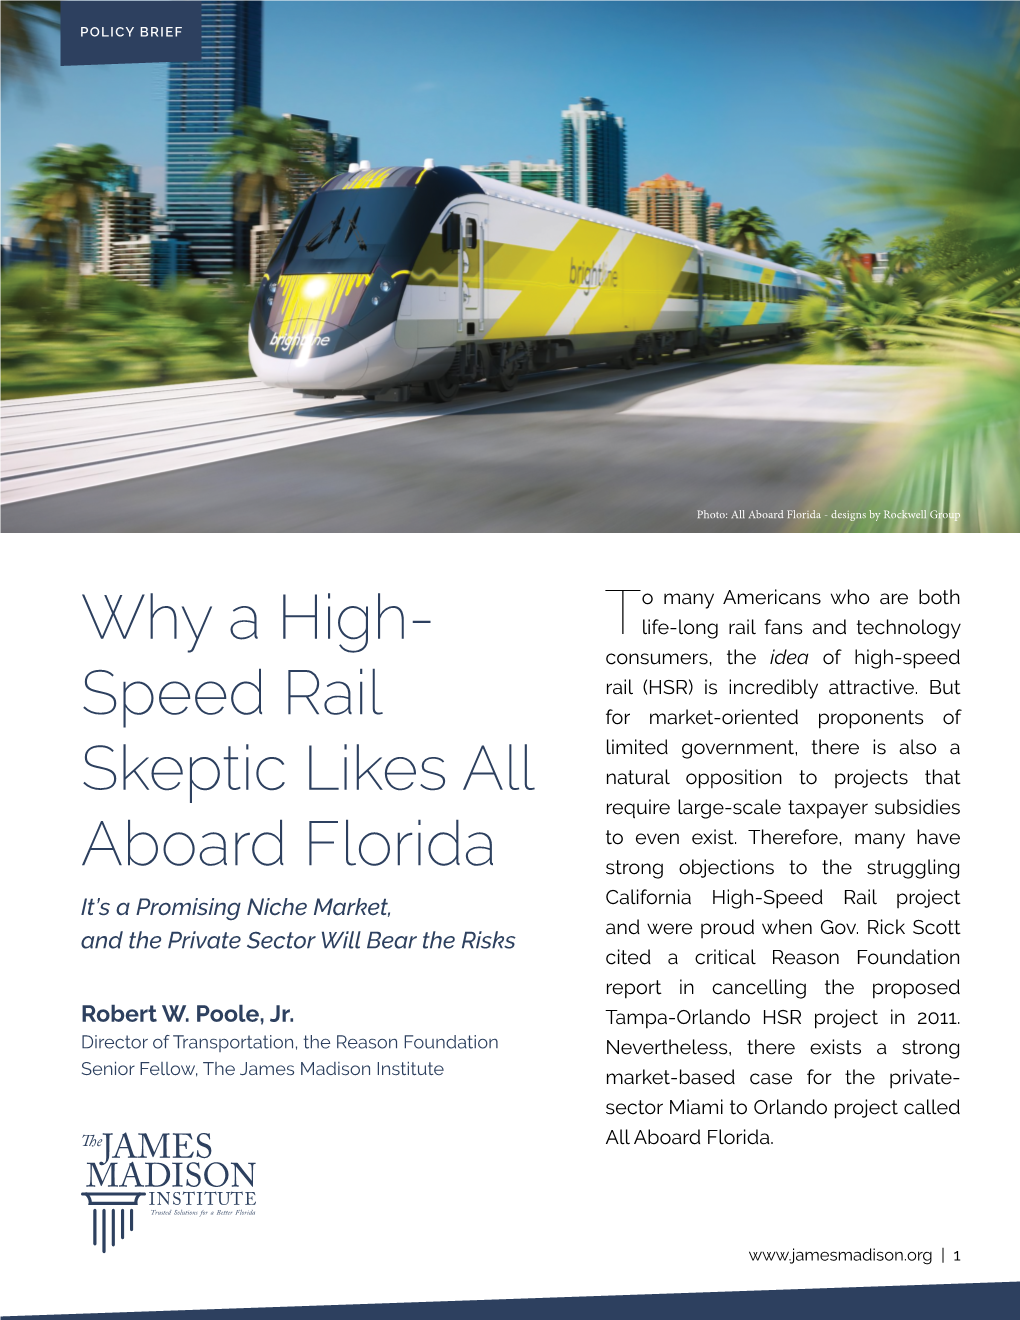 Why a High- Speed Rail Skeptic Likes All Aboard Florida